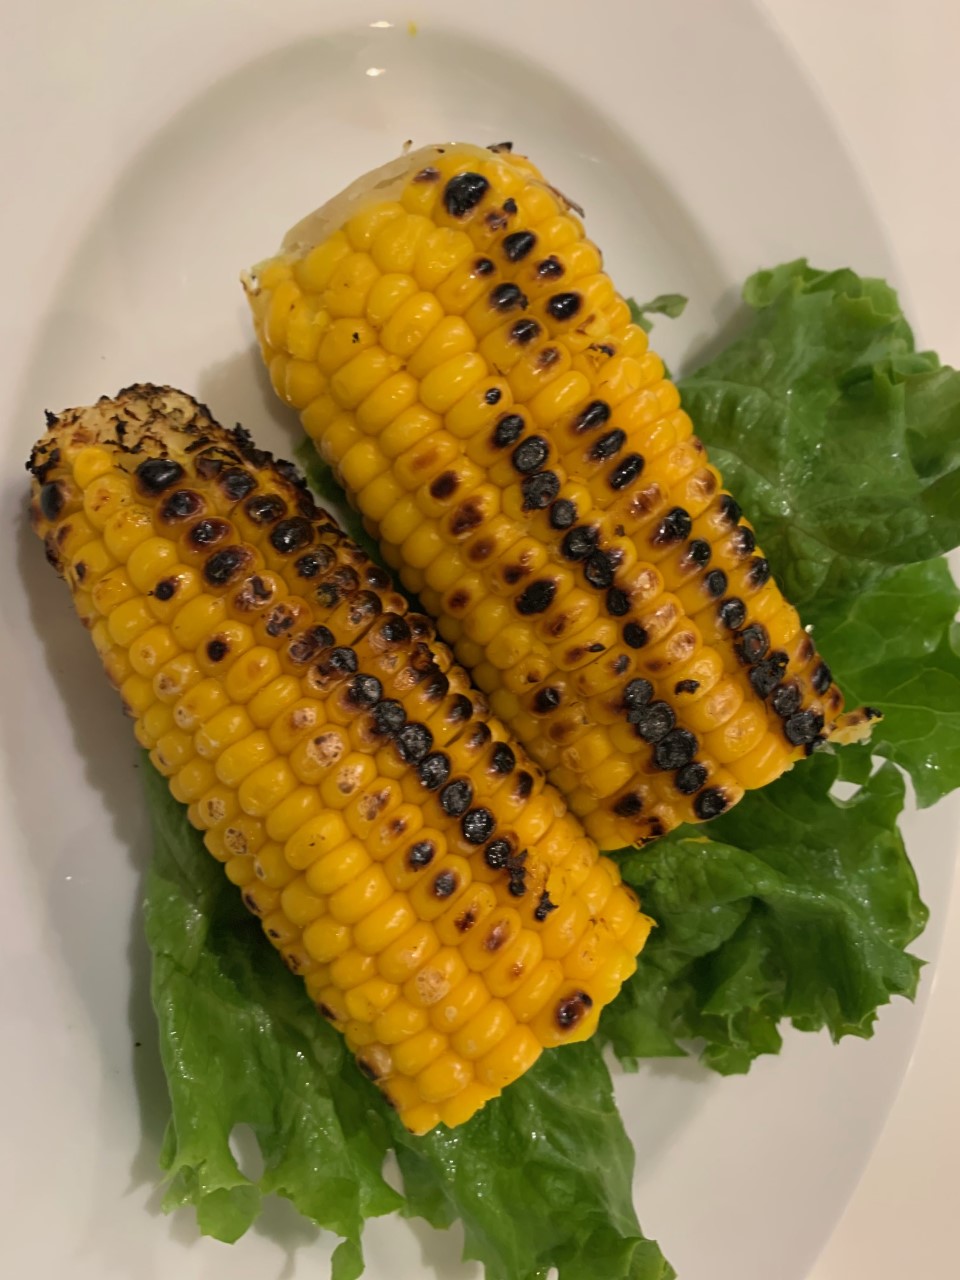 Grilled Corn on the cob garnished with lettuce